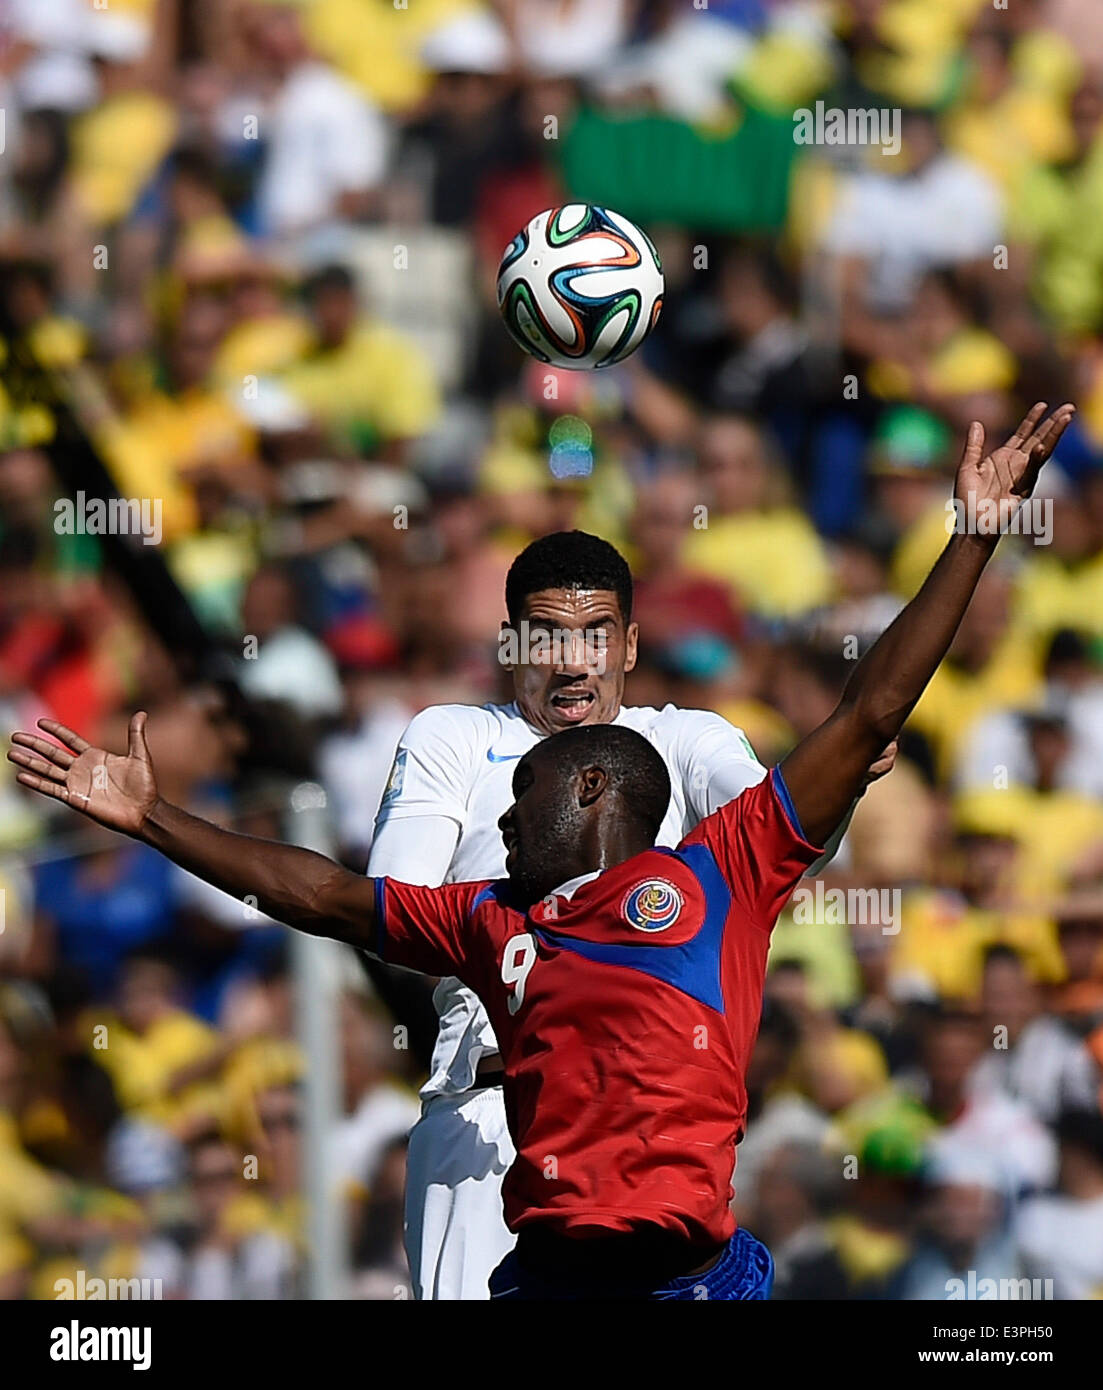 (140624) -- BELO HORIZONTE, June 24, 2014 (Xinhua) -- Costa Rica's Joel Campbell (front) competes for a header with England's Chris Smalling during a Group D match between Costa Rica and England of 2014 FIFA World Cup at the Estadio Mineirao Stadium in Belo Horizonte, Brazil, on June 24, 2014. England drew 0-0 with Costa Rica on Tuesday. (Xinhua/Qi Heng)(pcy) Stock Photo